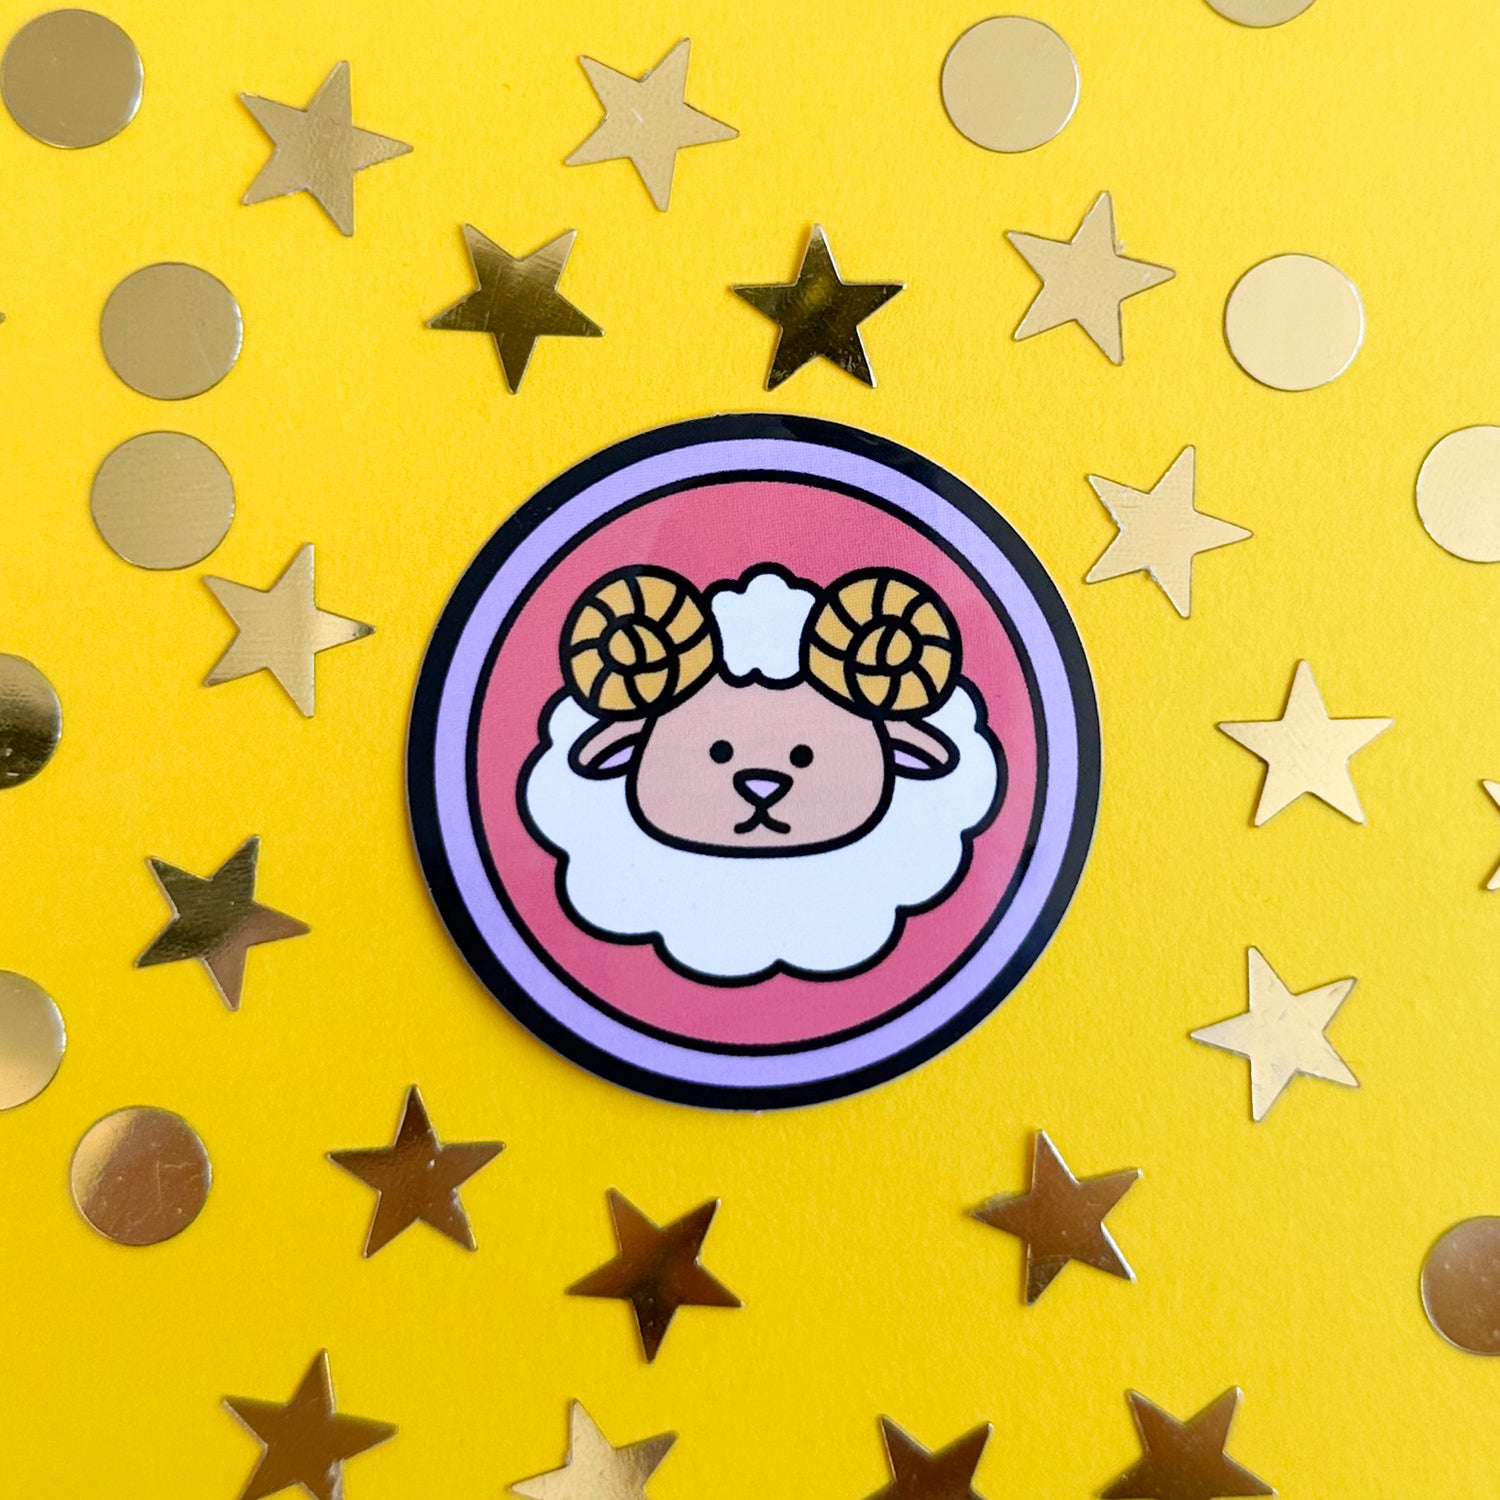 A circular sticker with a cute ram on it to symbolize Aries the sticker is sitting on a yellow background with gold stars and circles around it. 